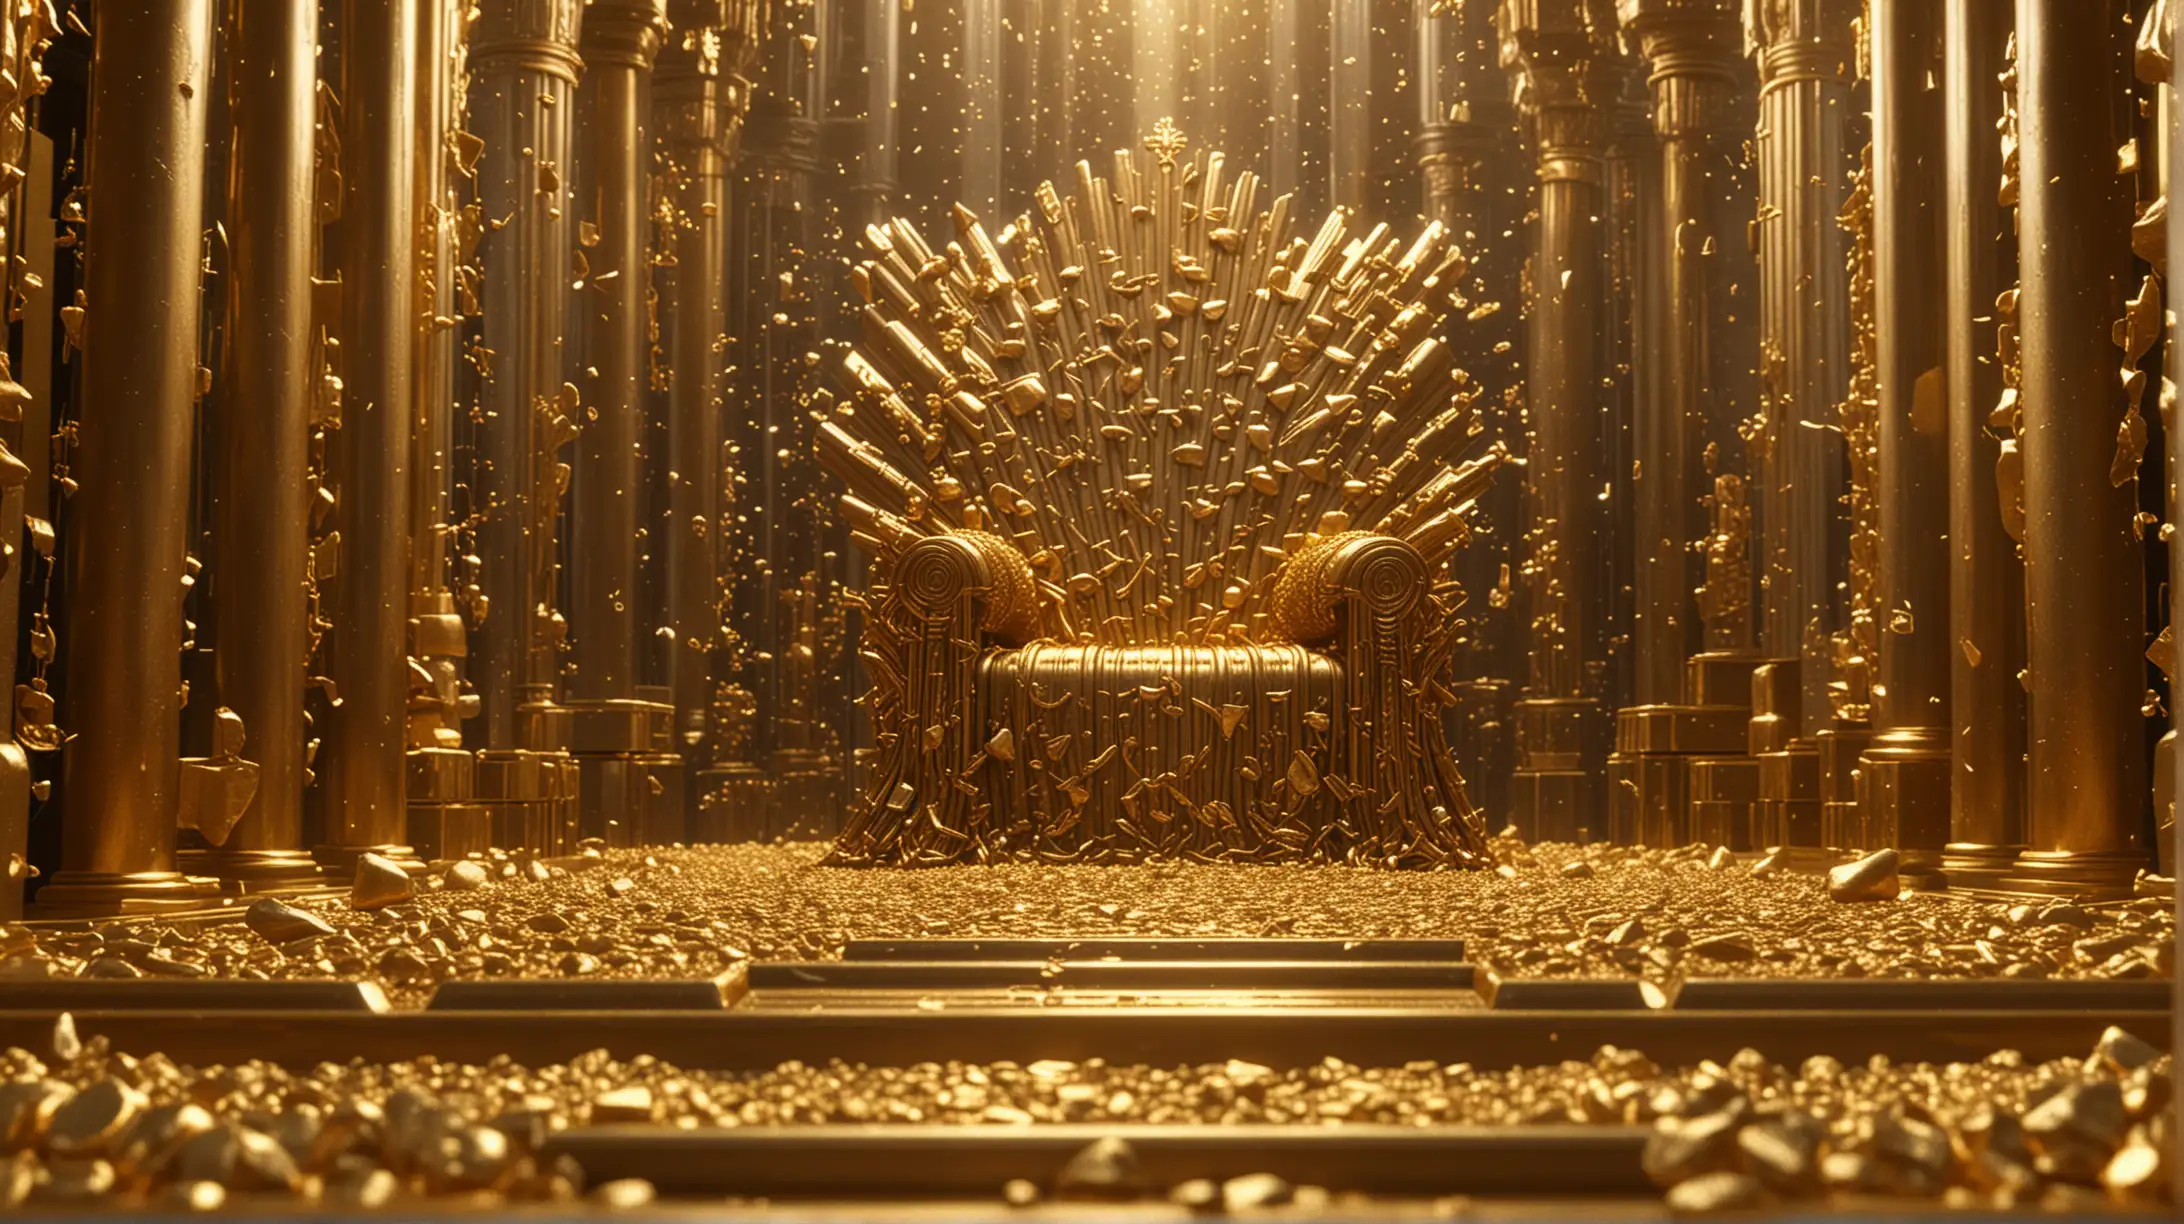 throne room made entirely out of gold. double height. very intricately and microscopically detailed. light particles. cinematic lighting and cinematic shading. surrounded by gold bars and melted gold. fanatically pragmatic 3d blender sfm compositions. ultra realistic blender sfm textures.